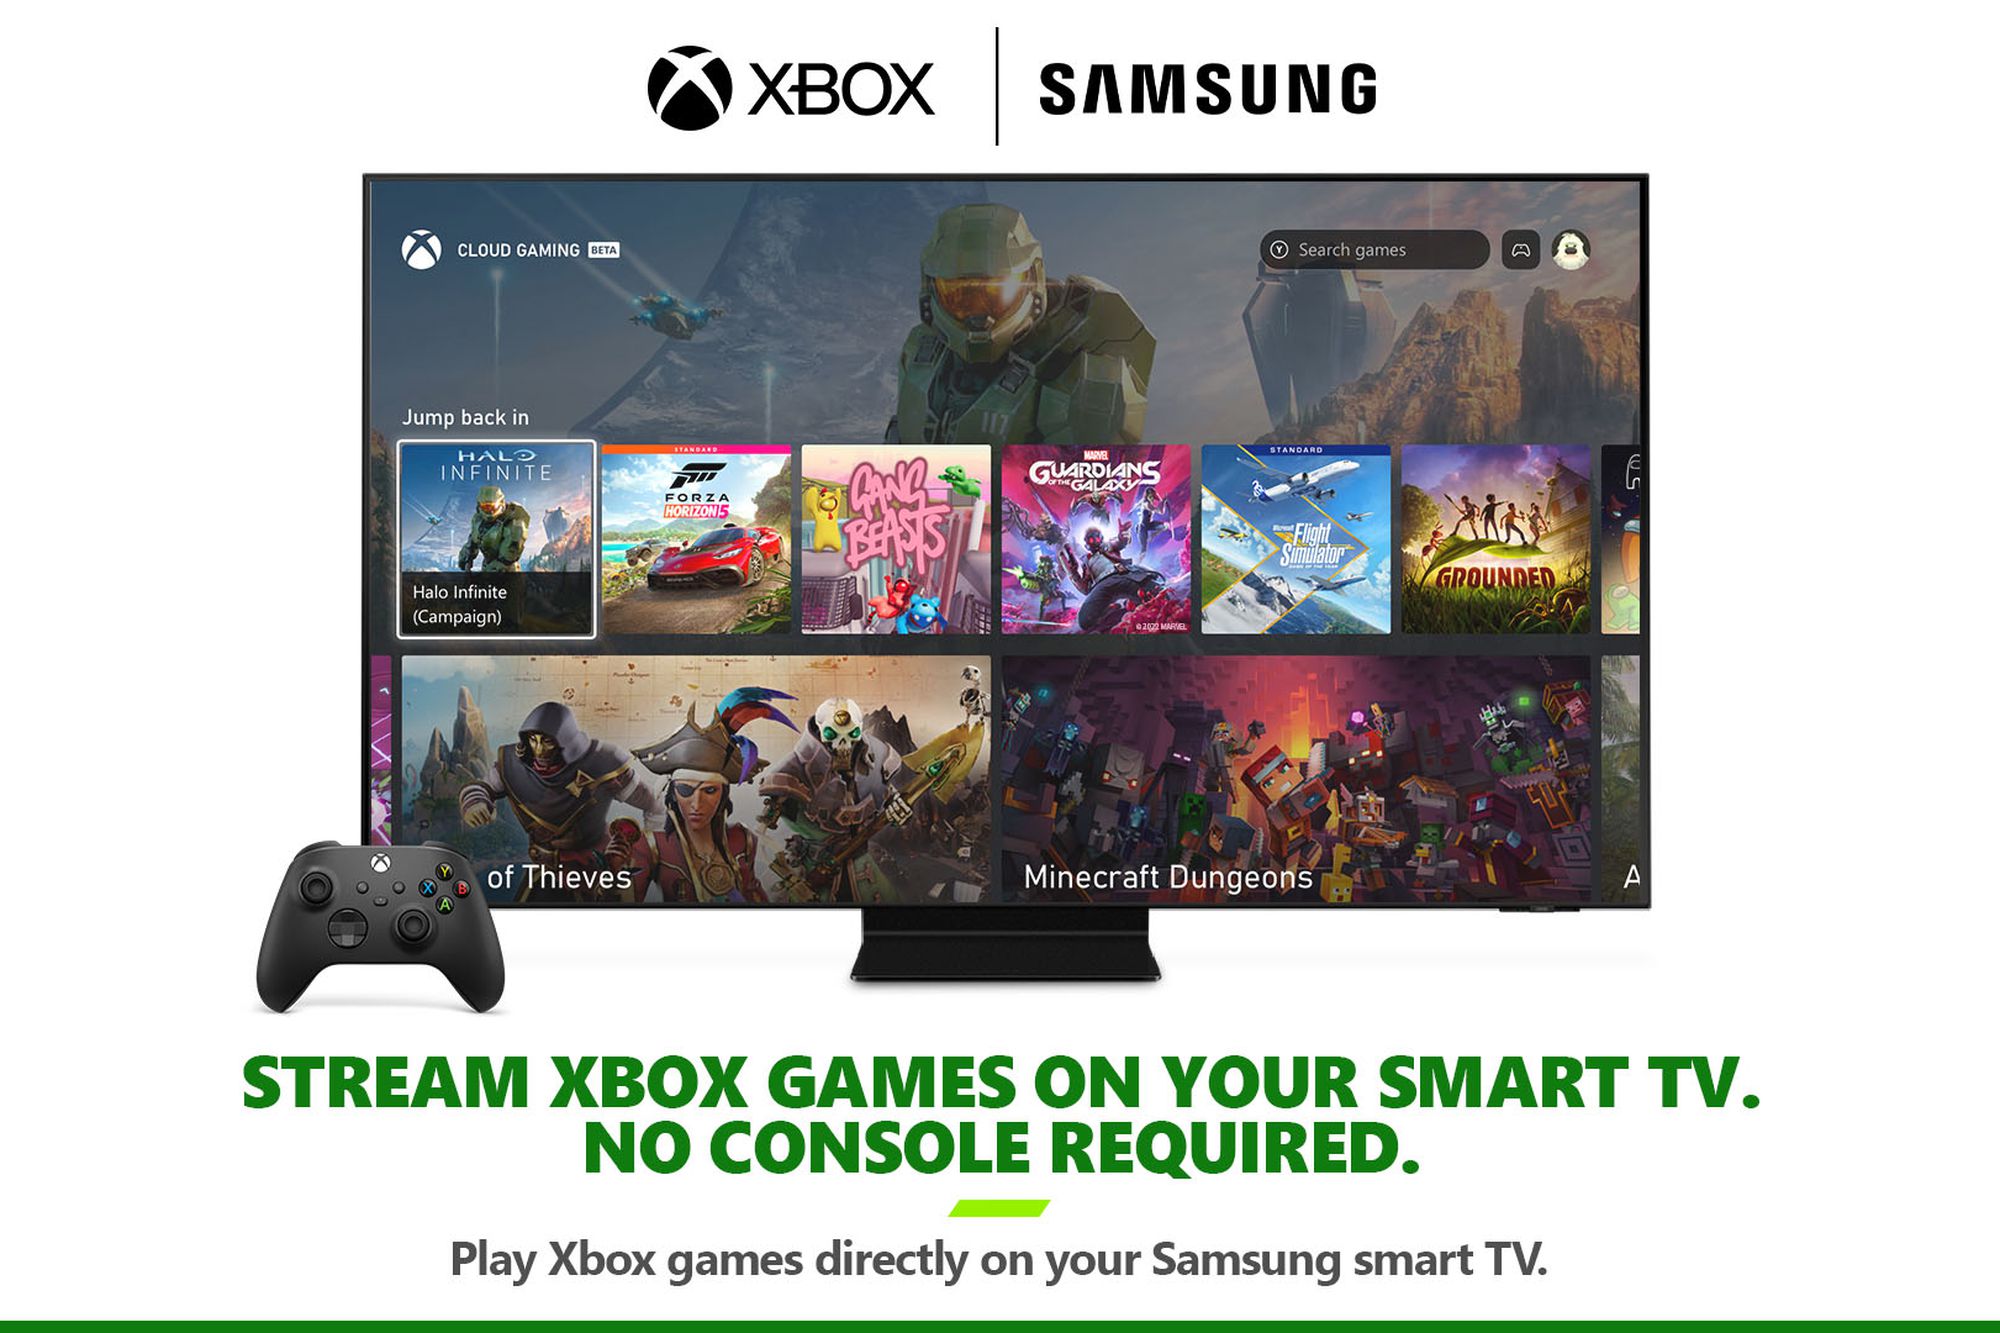 tack Veranderlijk overstroming Microsoft's new Xbox TV app streams games without a console later this  month - The Verge